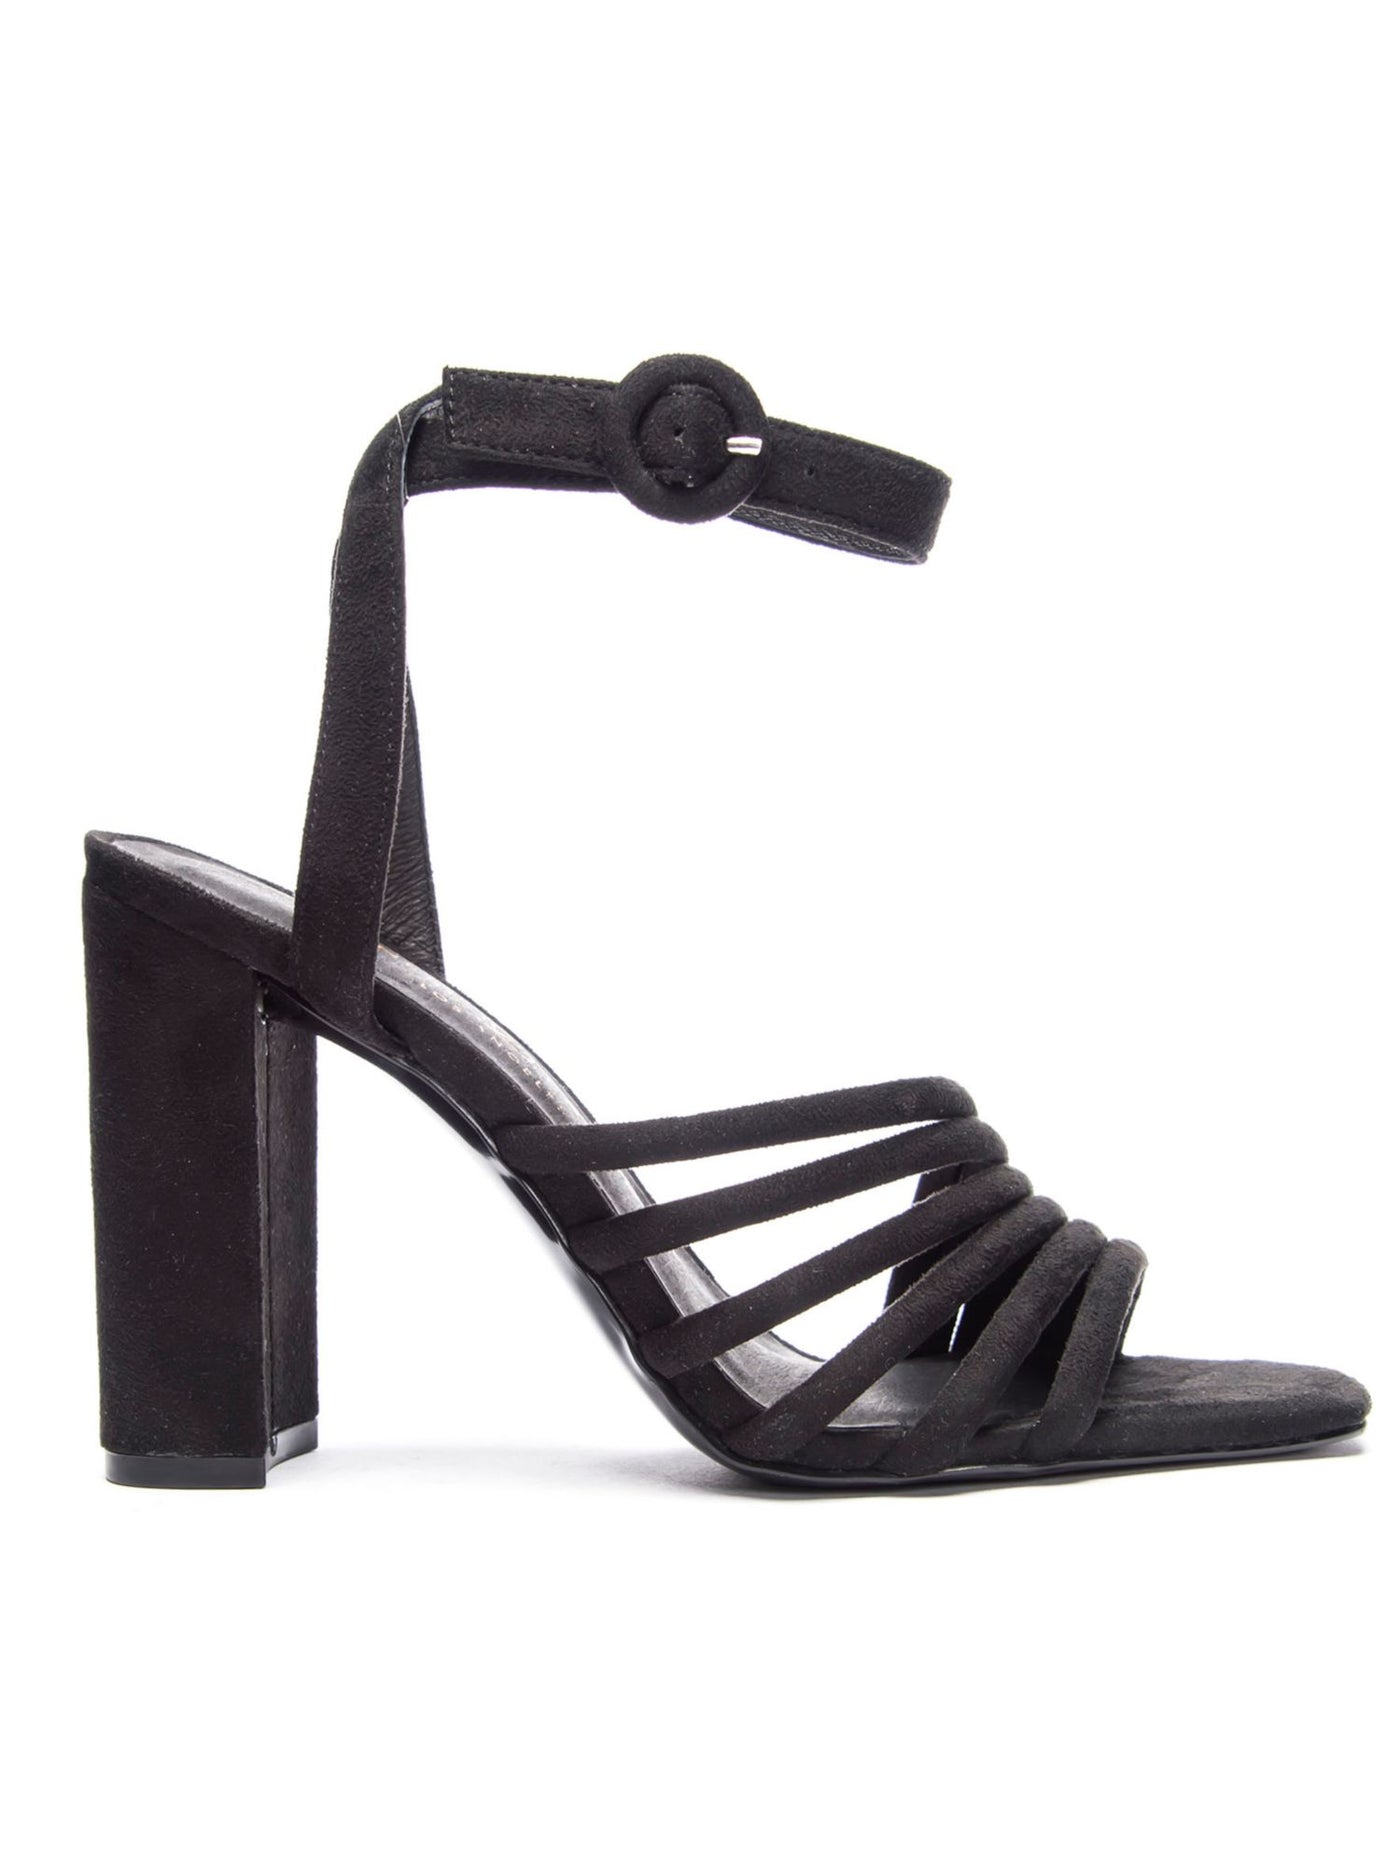 CHINESE LAUNDRY Womens Black Asymmetrical Strappy Jonah Square Toe Block Heel Buckle Dress Sandals Shoes 5.5